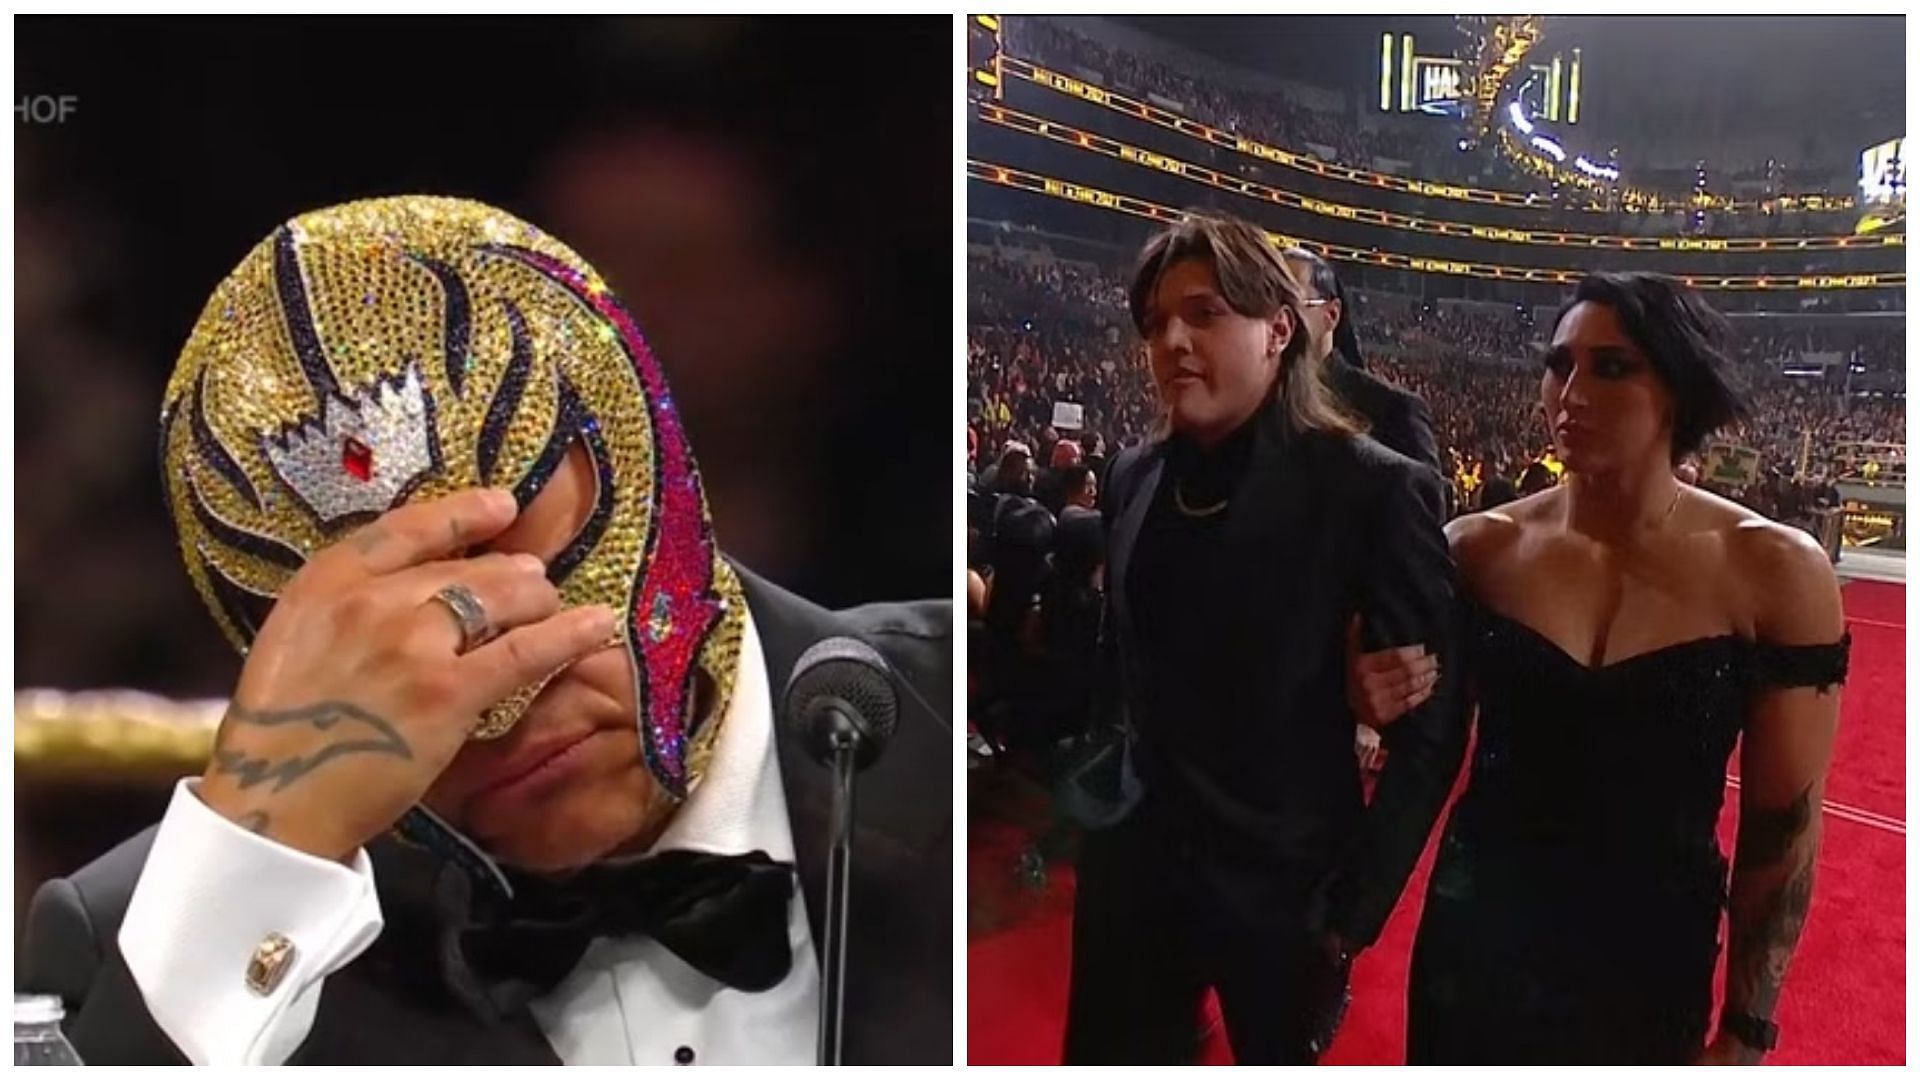 Rey Mysterio is now a WWE Hall of Famer.